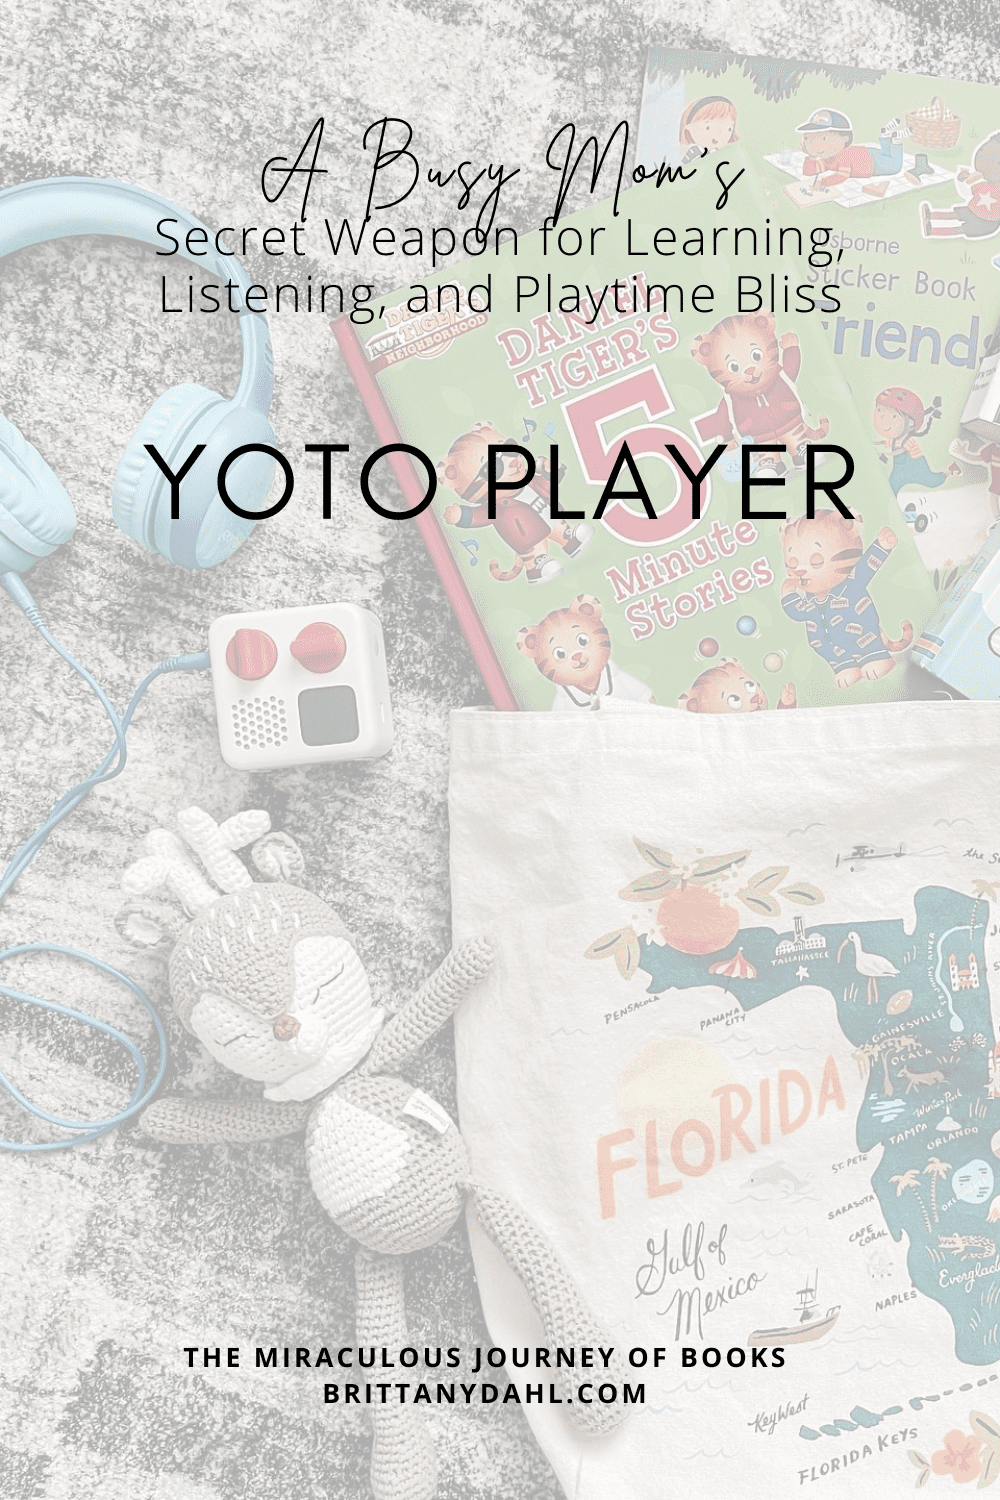 Yoto Player: A Busy Mom’s Secret Weapon for Learning, Listening, and Playtime Bliss